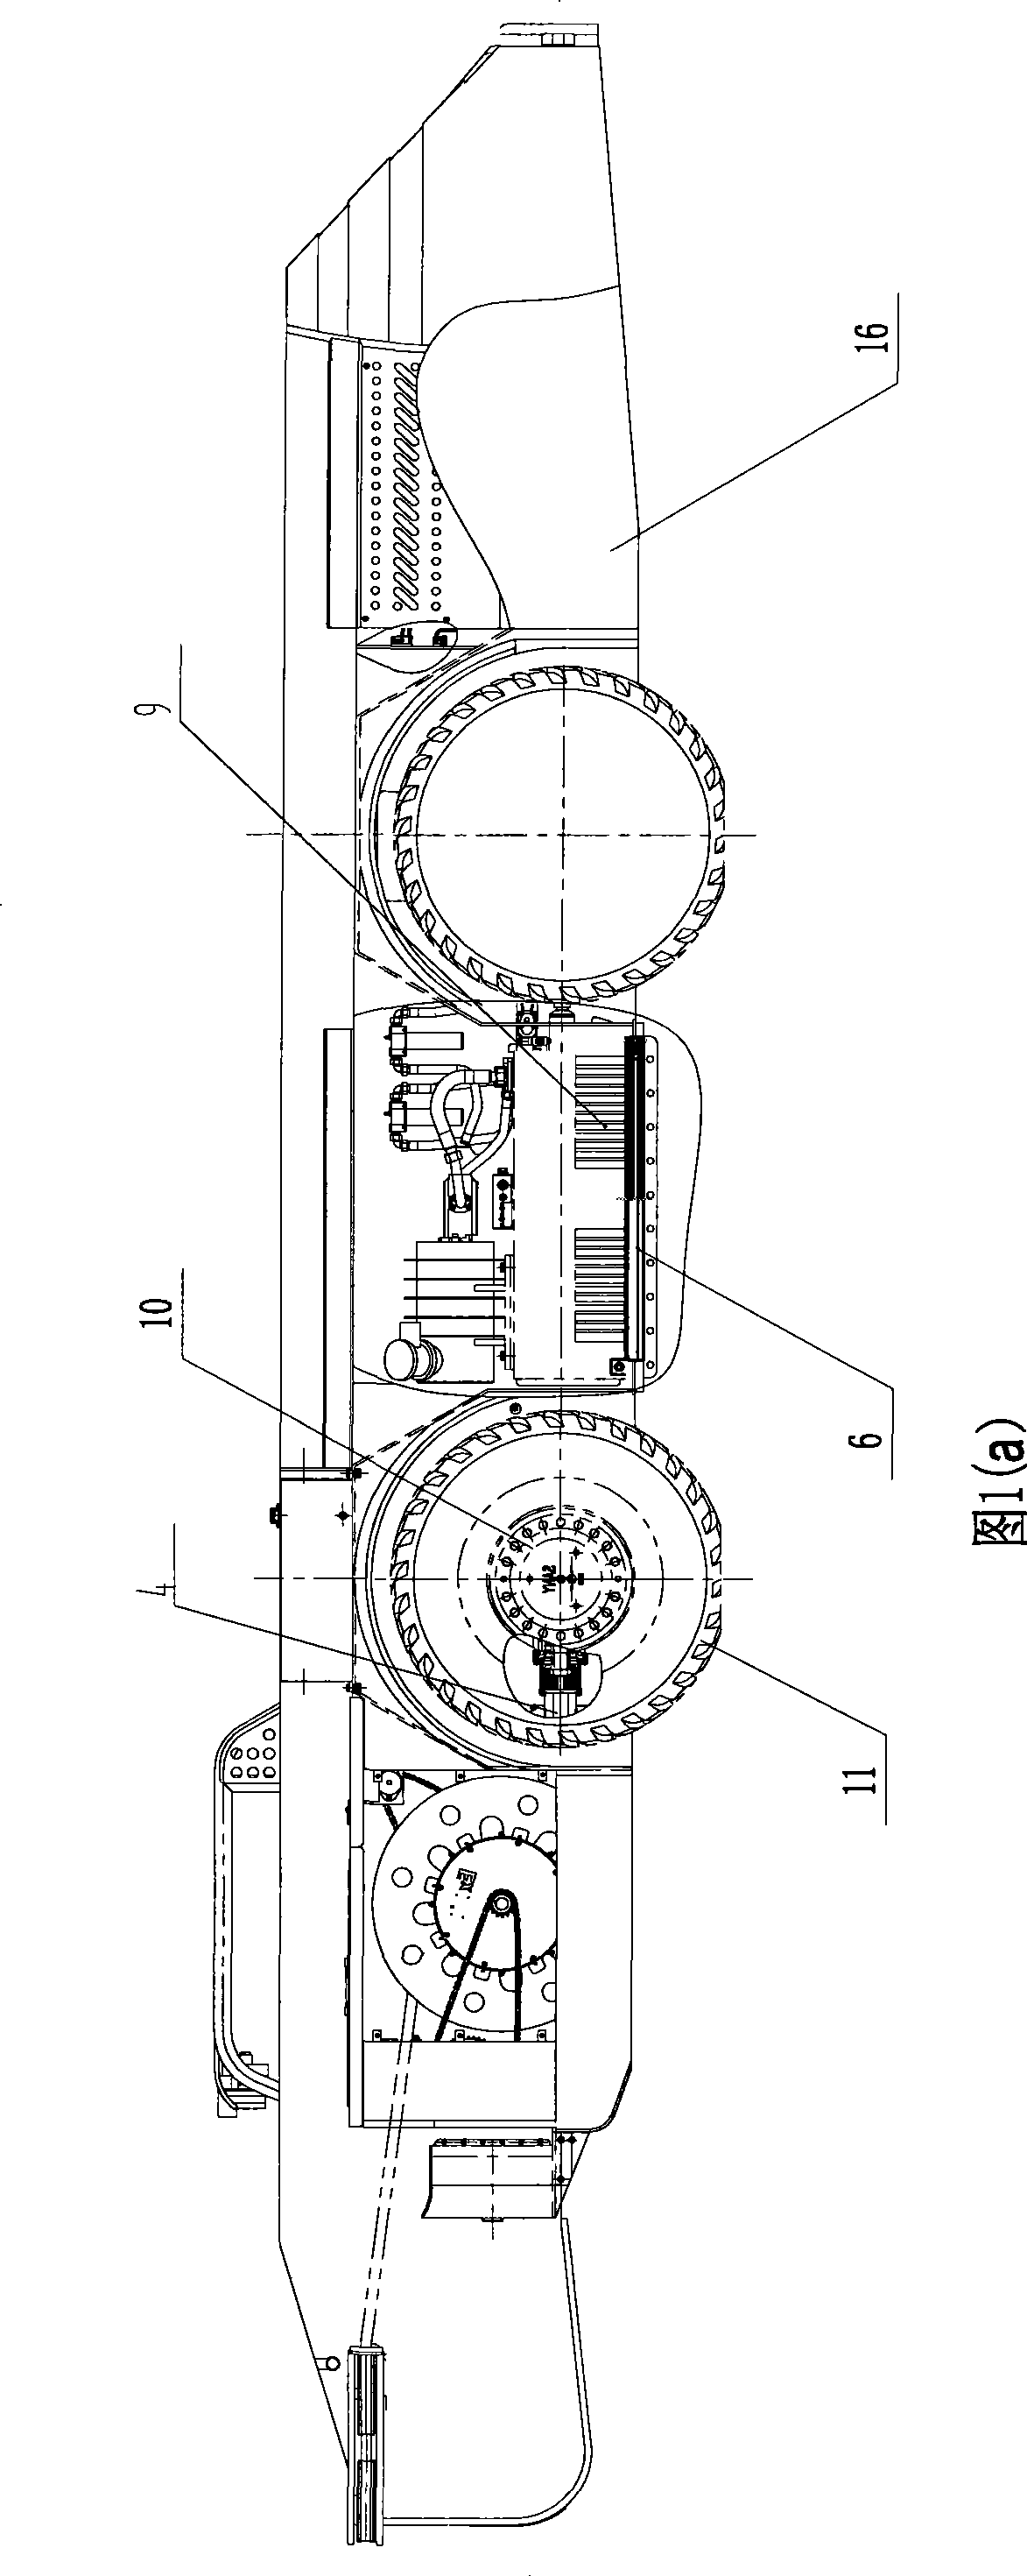 Cooling device for variable frequency controller